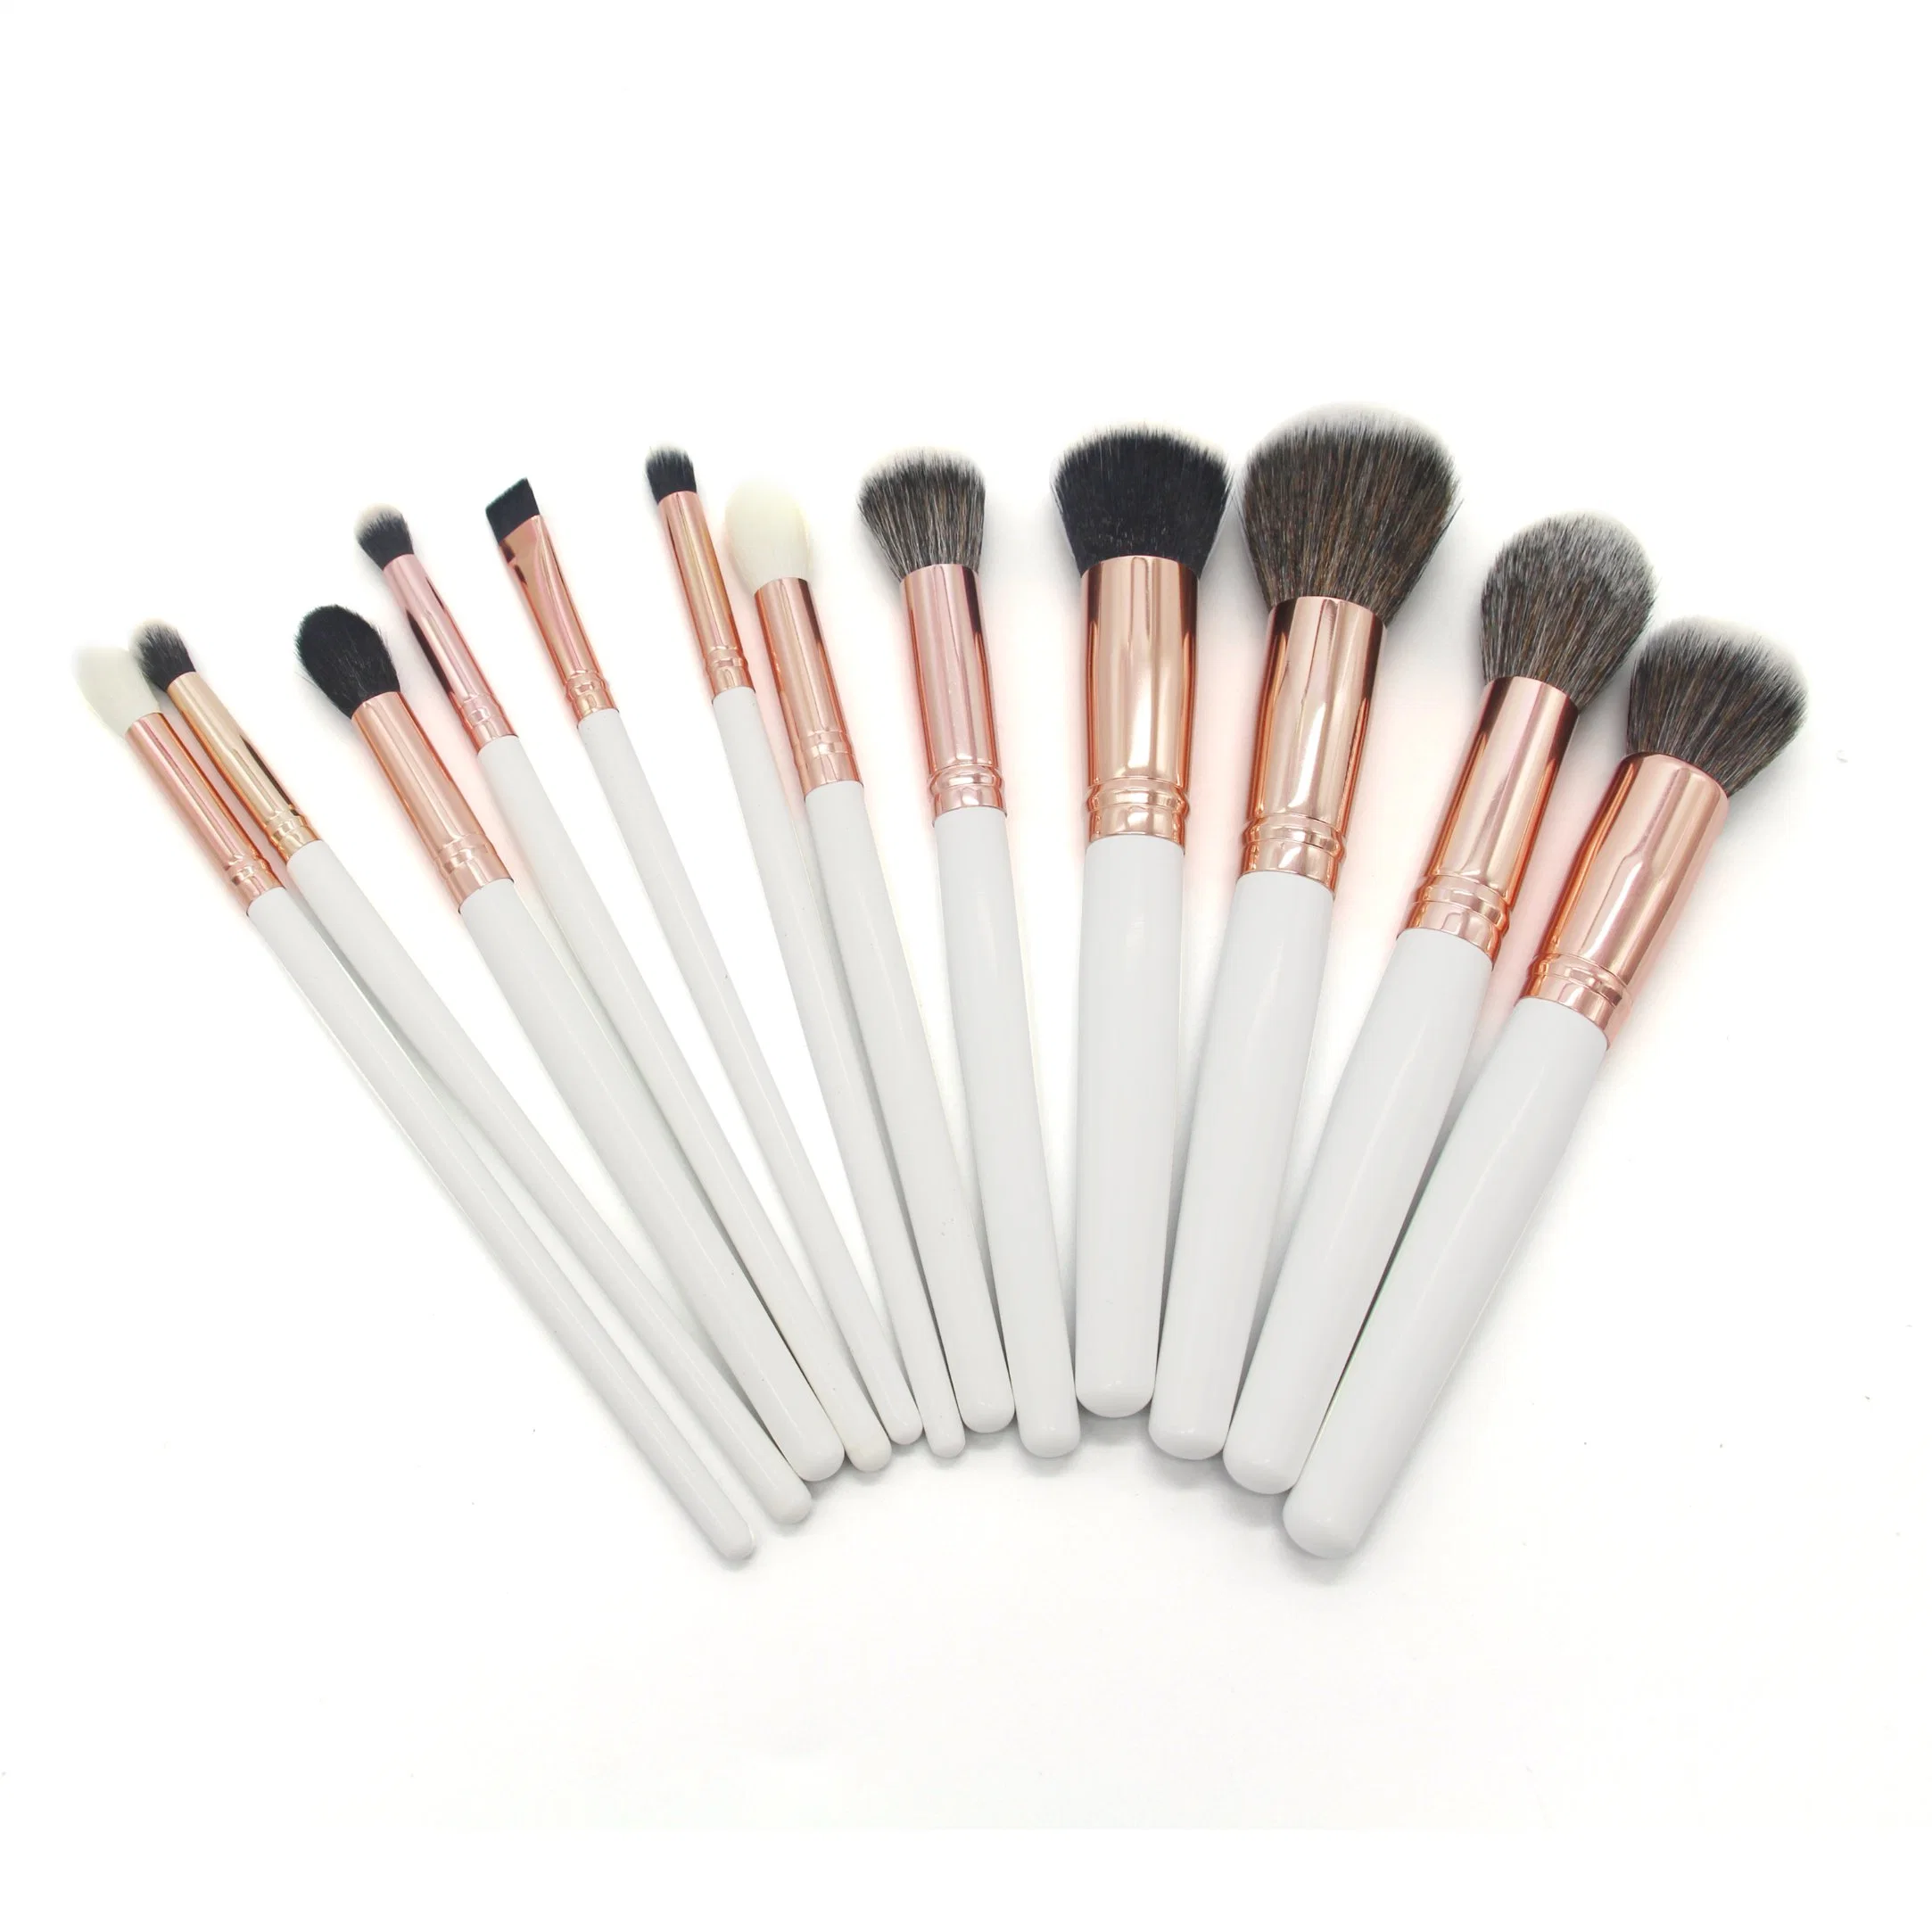 White Luxury Makeup Brush Set Kit Wholesale/Supplier Wood Handle Private Label Foundation Cosmetic Makeup Brushes